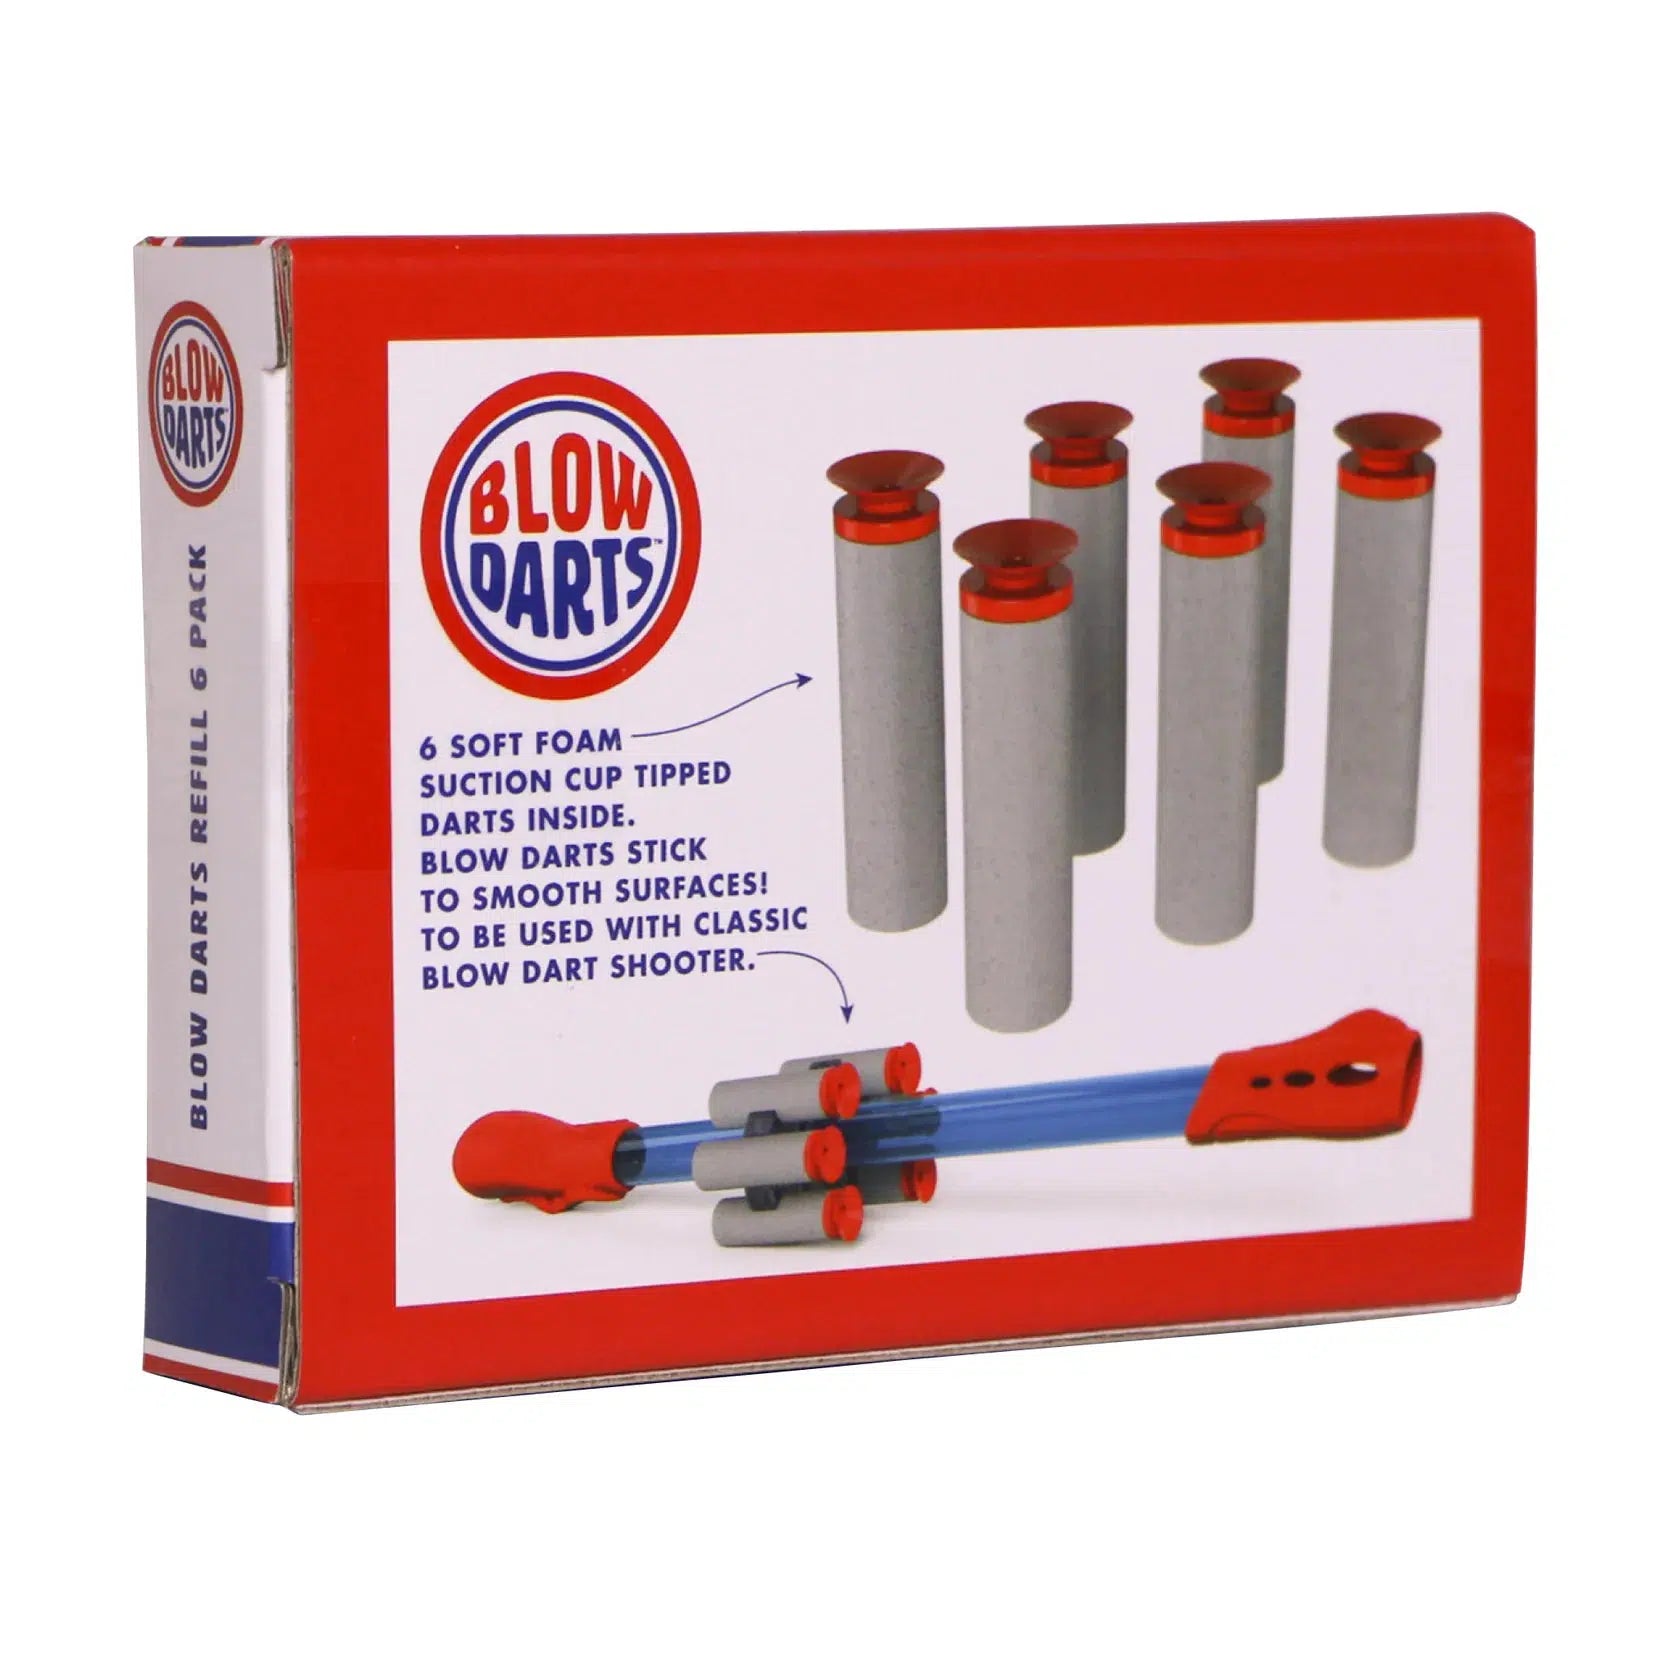 Front view of Refill Blow Darts in box.